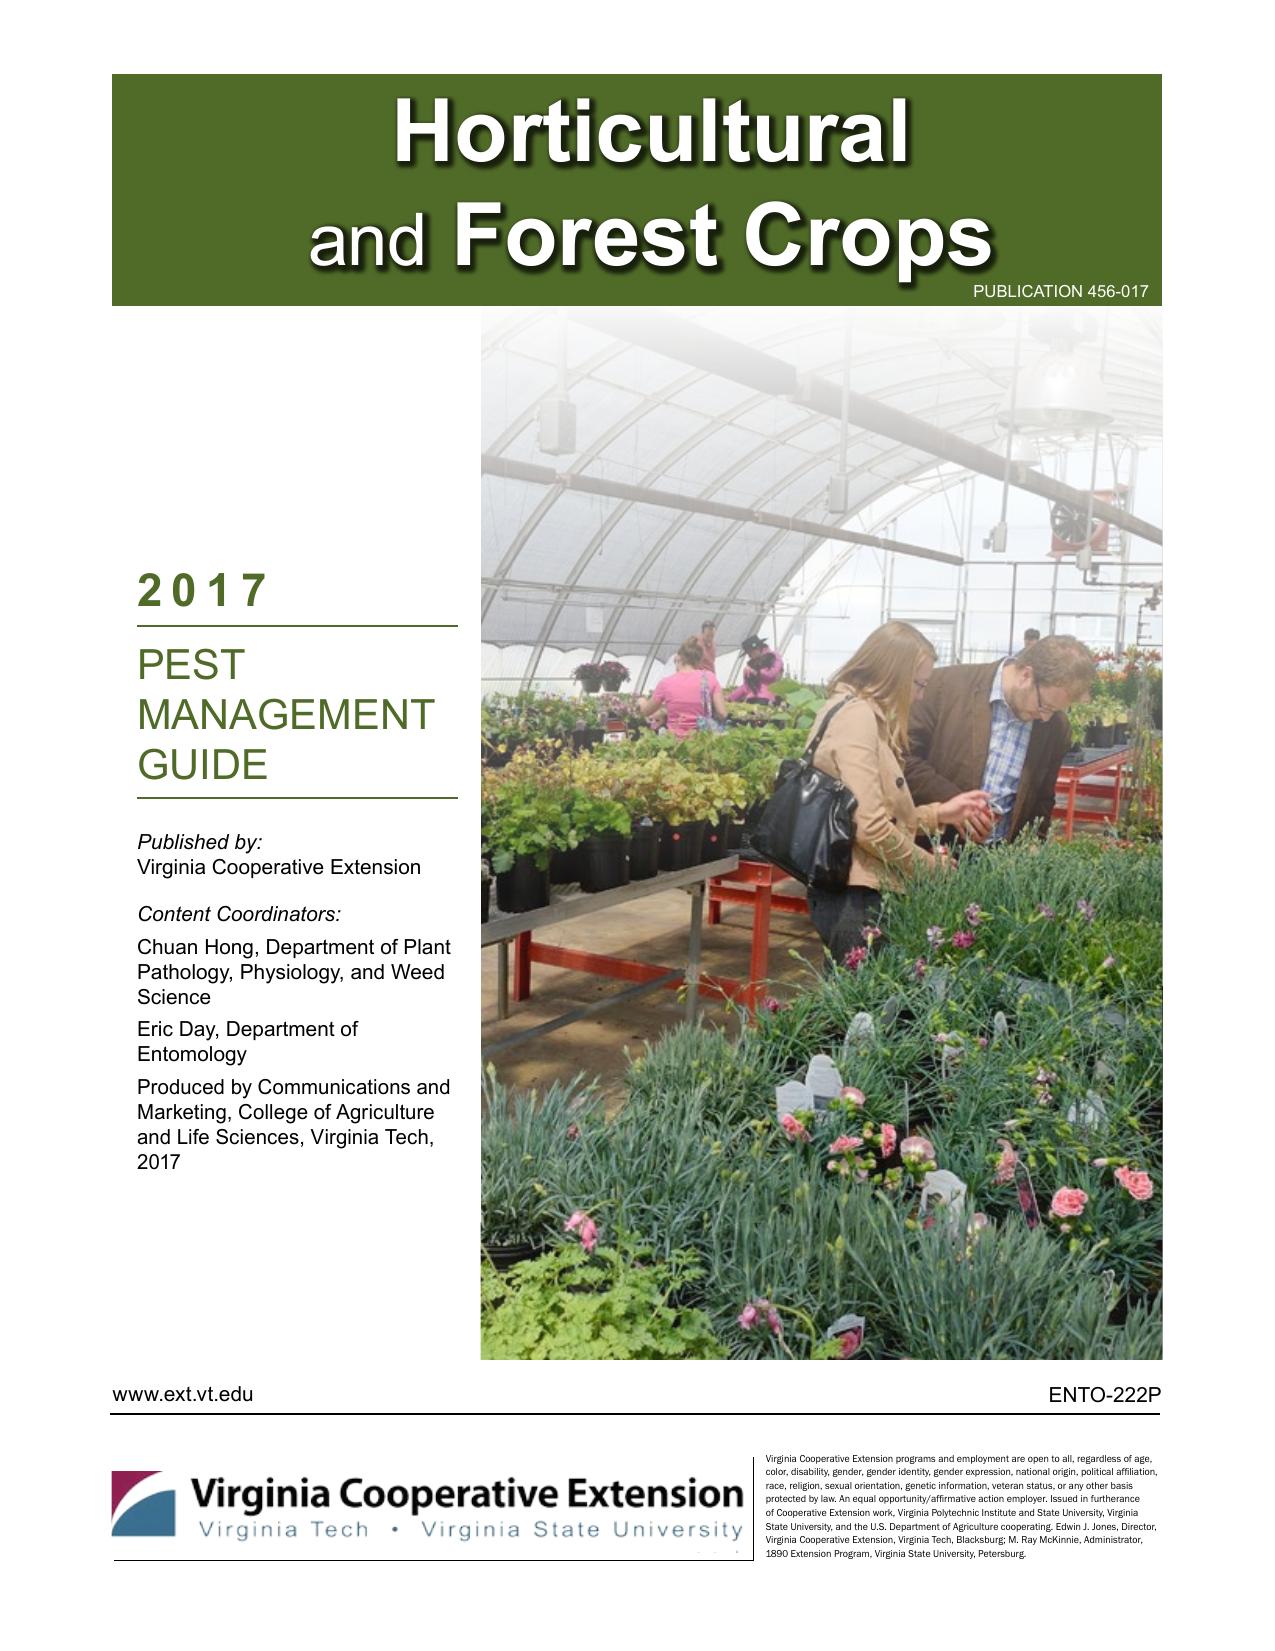 Horticultural and Forest Crops, 2017